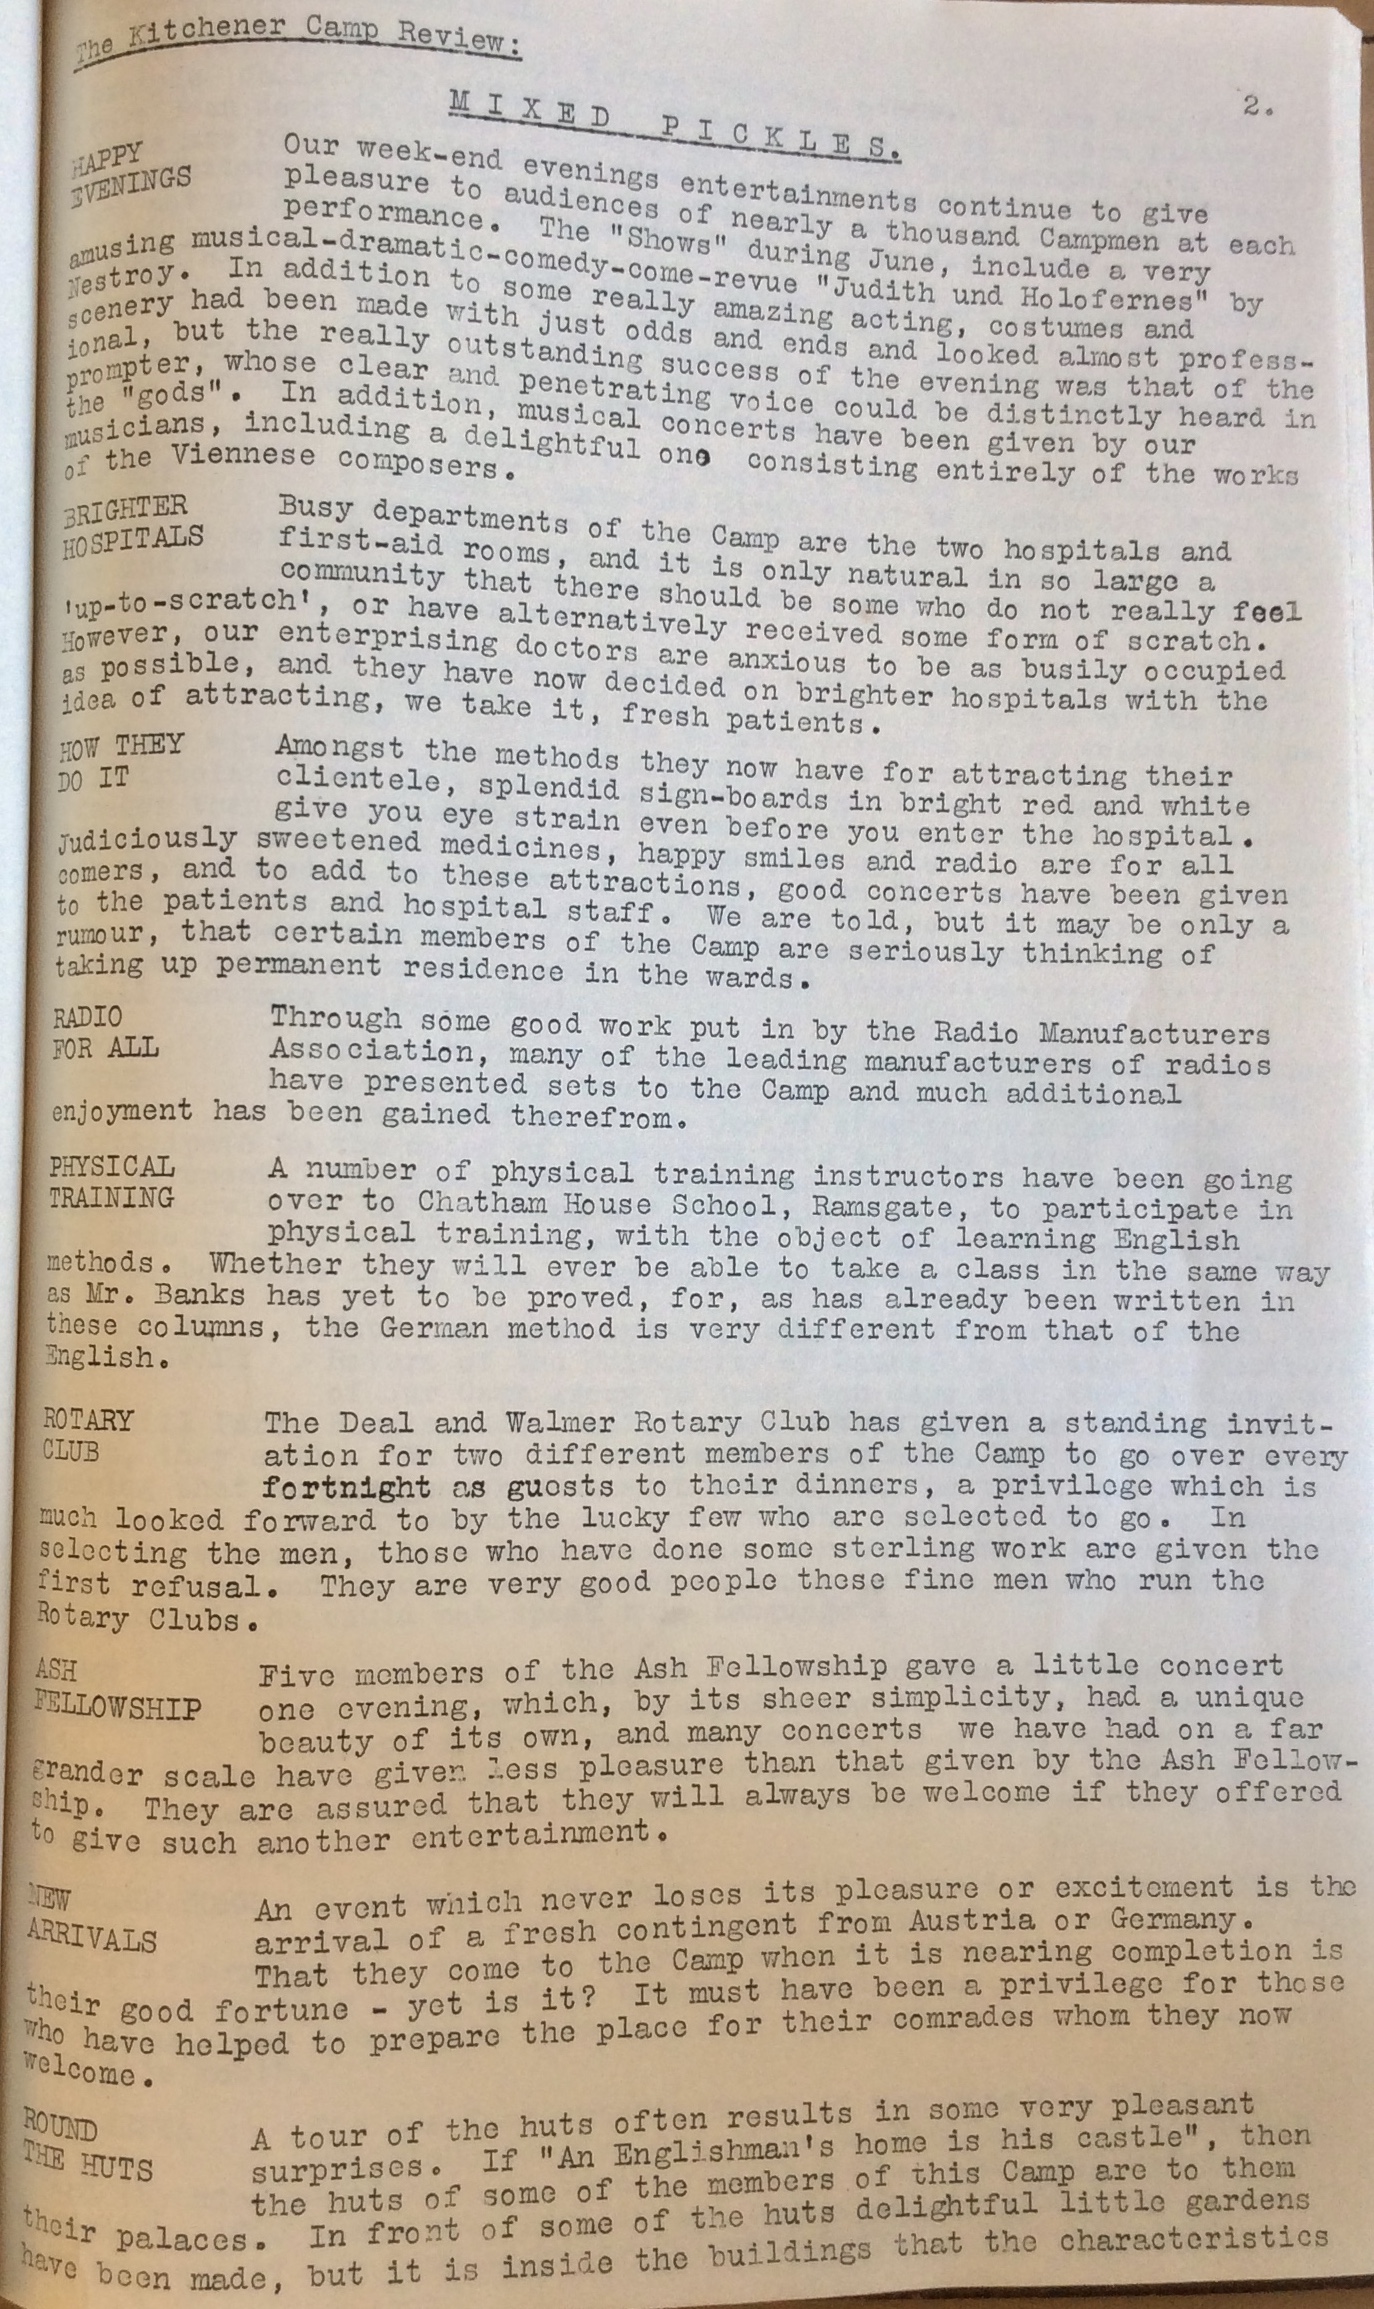 The Kitchener Camp Review, July 1939, No. 5, page 2